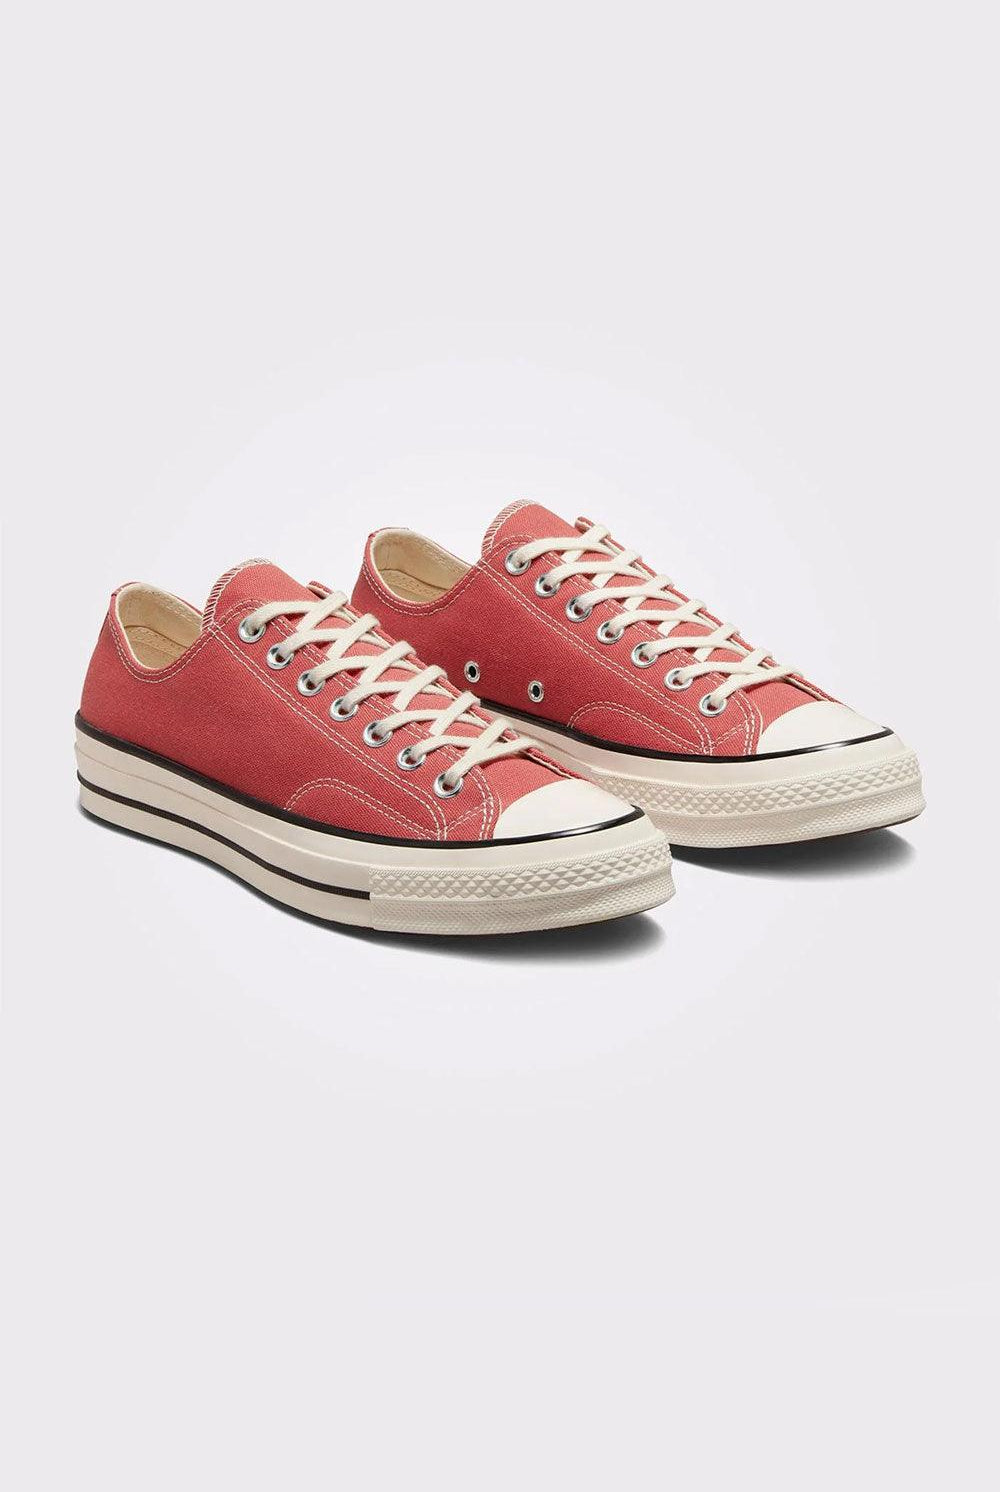 Converse | Chuck 70 Spring Color Ox Rhubarb Pie 1 | Milagron